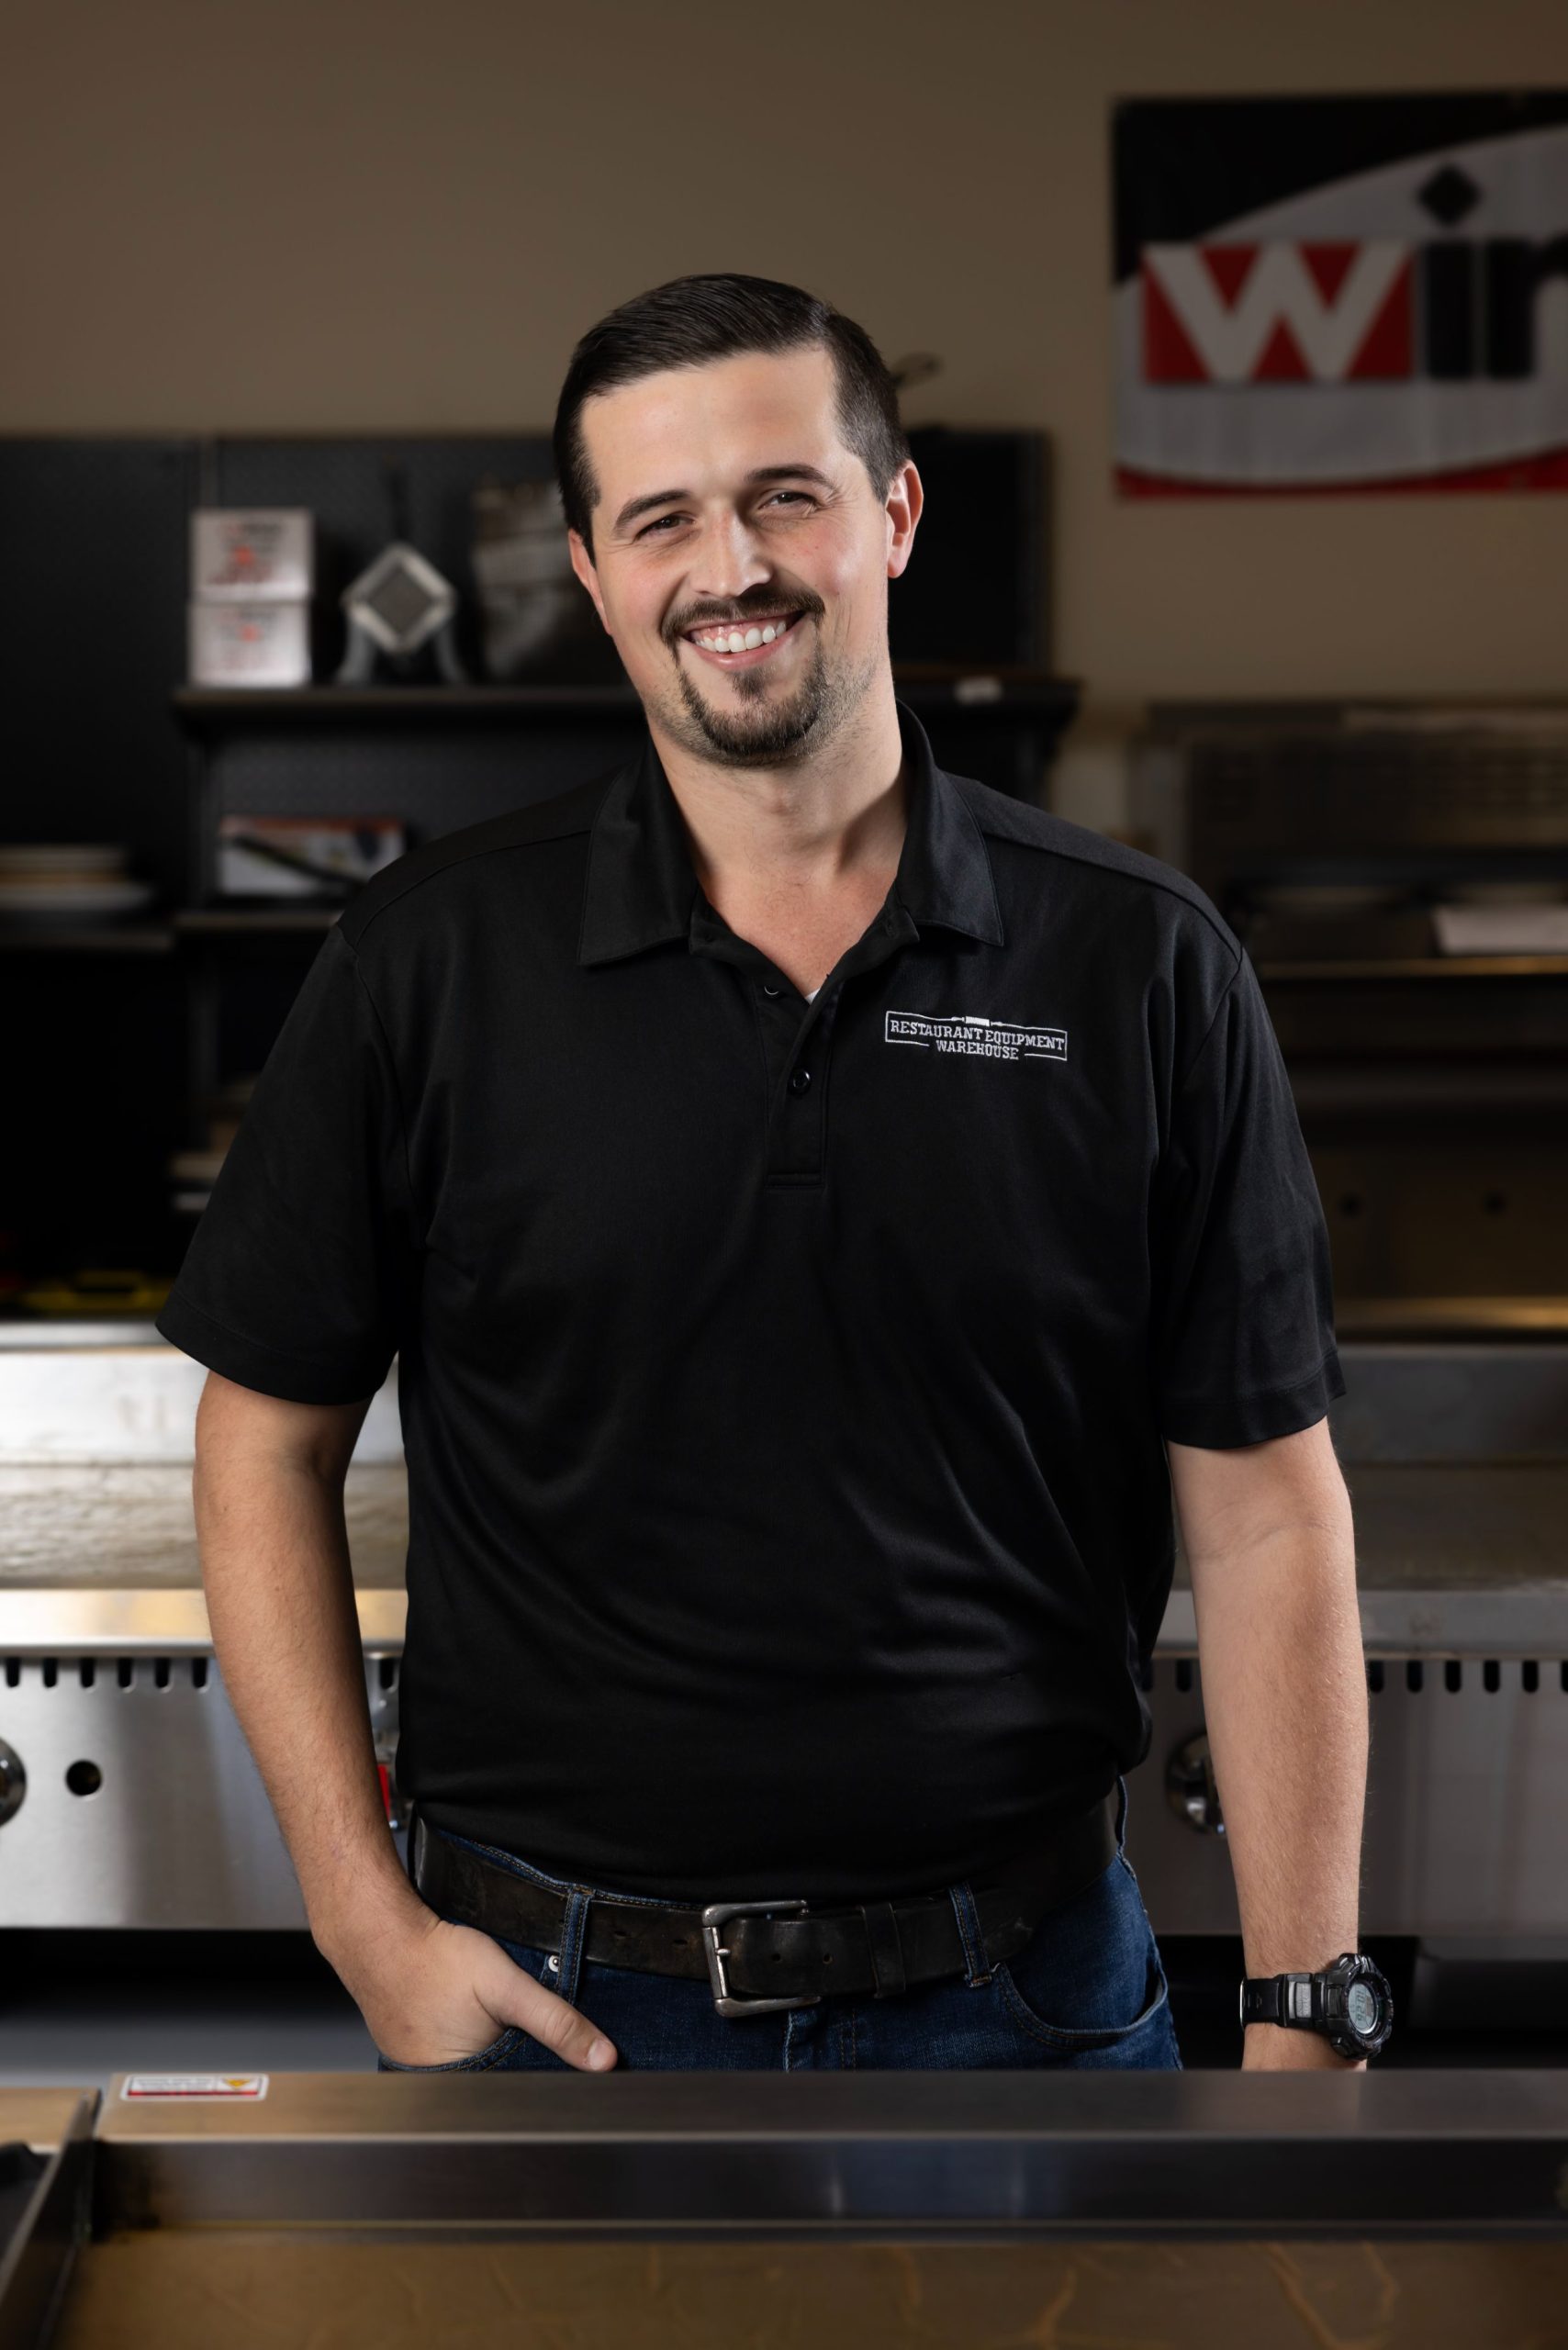 Ryan has been a Sales Consultant for REW since 2015. He specializes in making sure that every detail of any size equipment project is considered from beginning to end. His passions include spending time with his family and being an active member in his local church. He believes that there is a perfect piece of equipment/product for every situation and it is Ryan's goal to help his clients find those to maximize success.